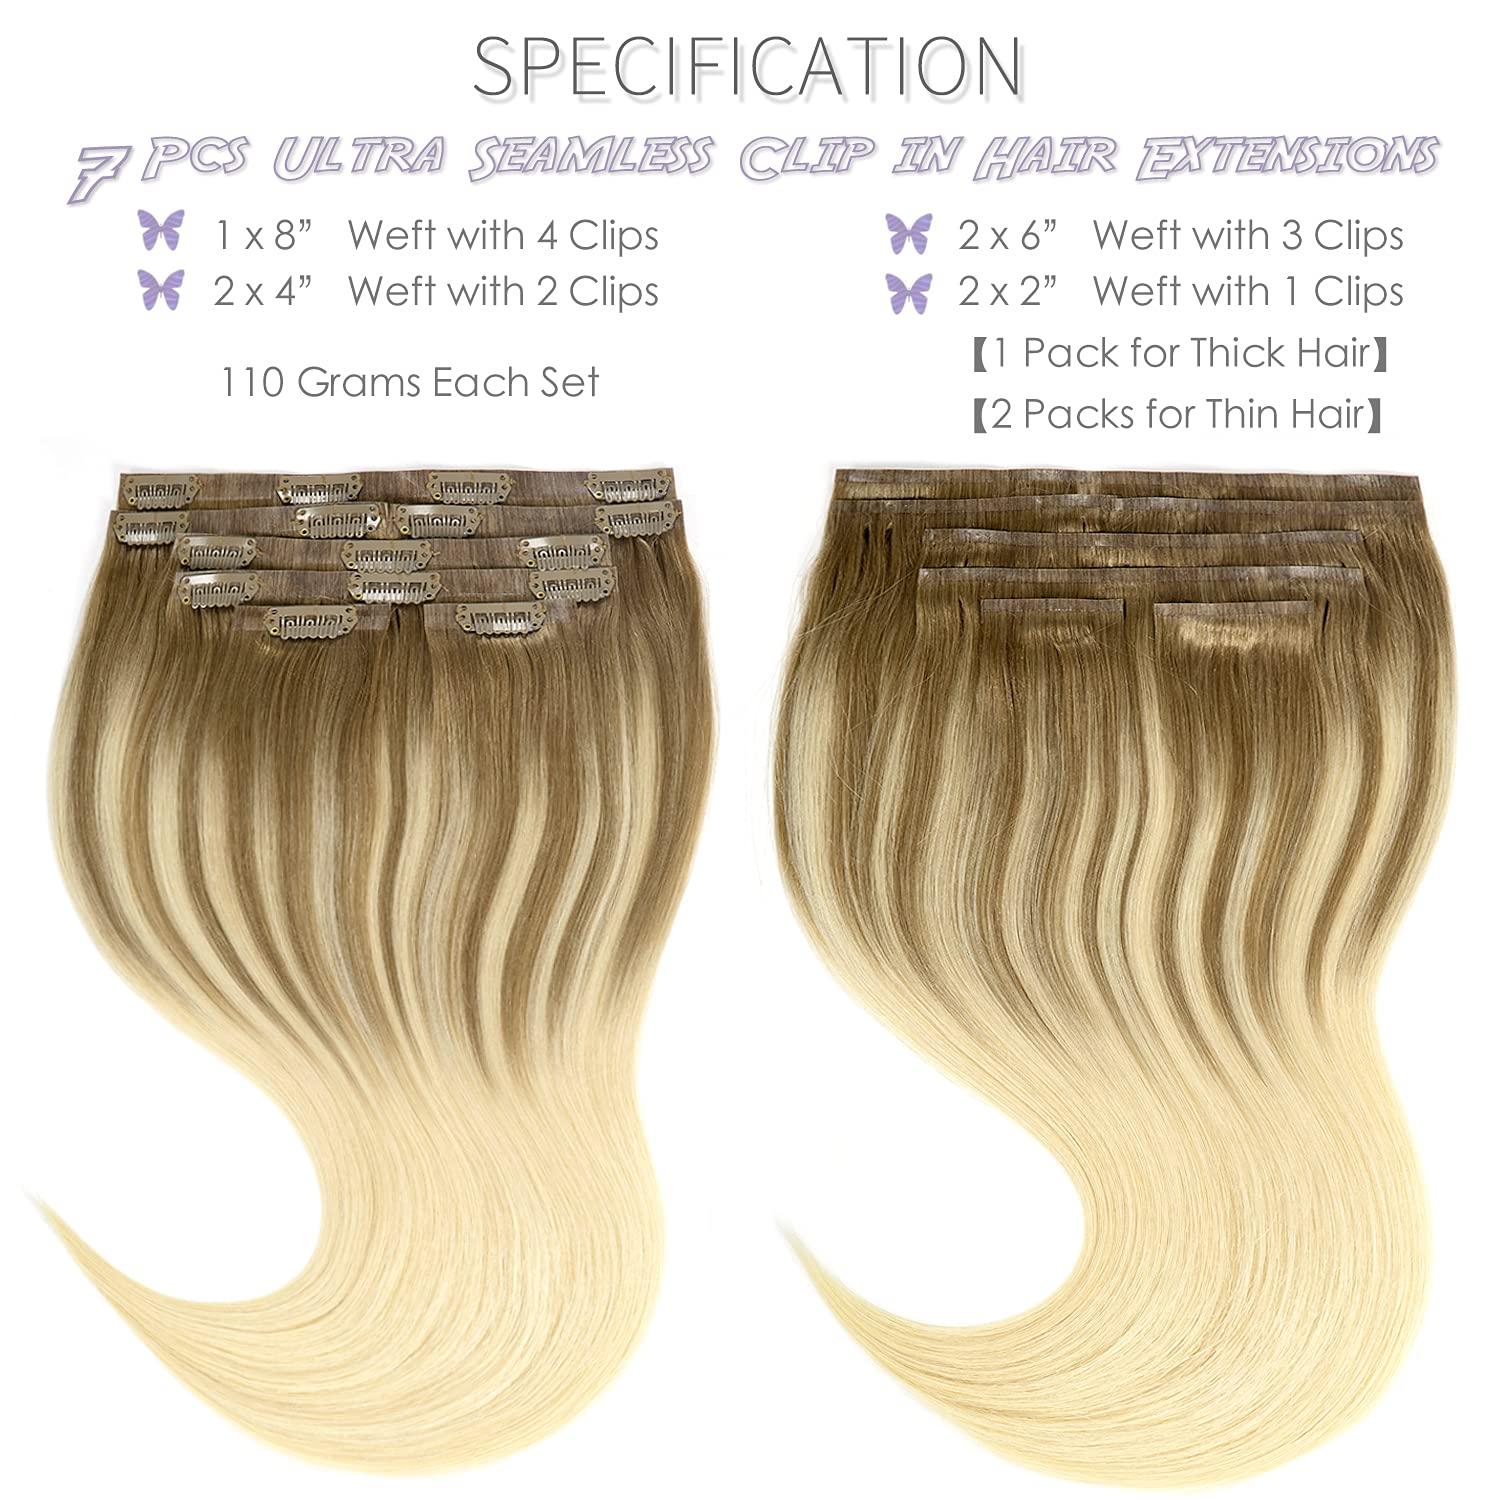 Lacer Ultra Thin Weft Seamless Hair Extensions Clip in Human Hair